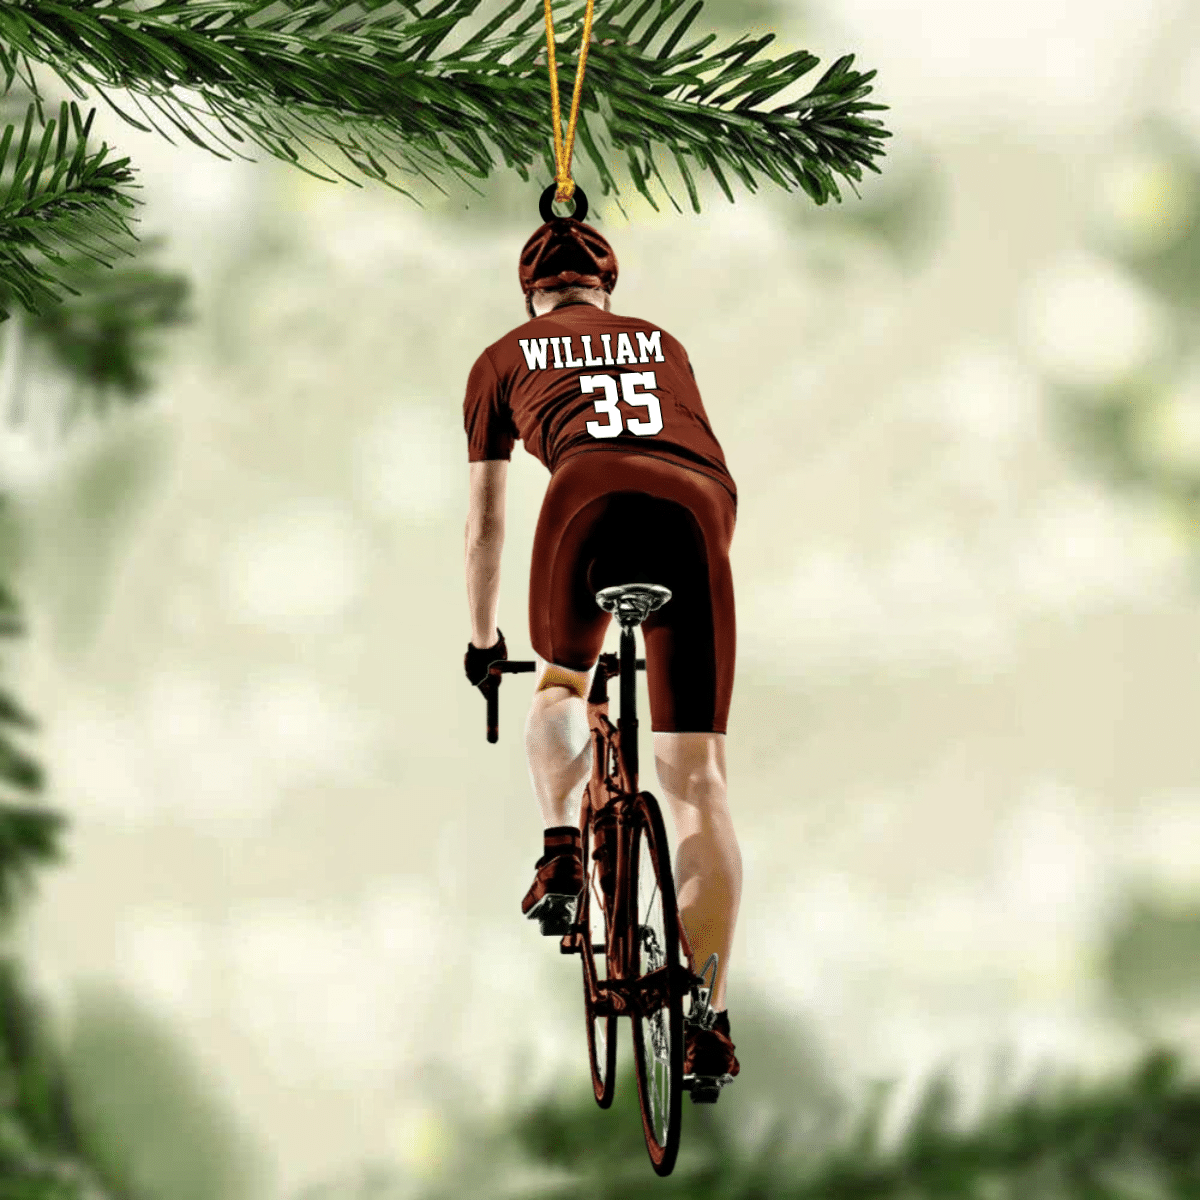 Personalized Male Cyclist / Bike Riding Acrylic Ornament/ Gift For Cyclists/ Gift for Man